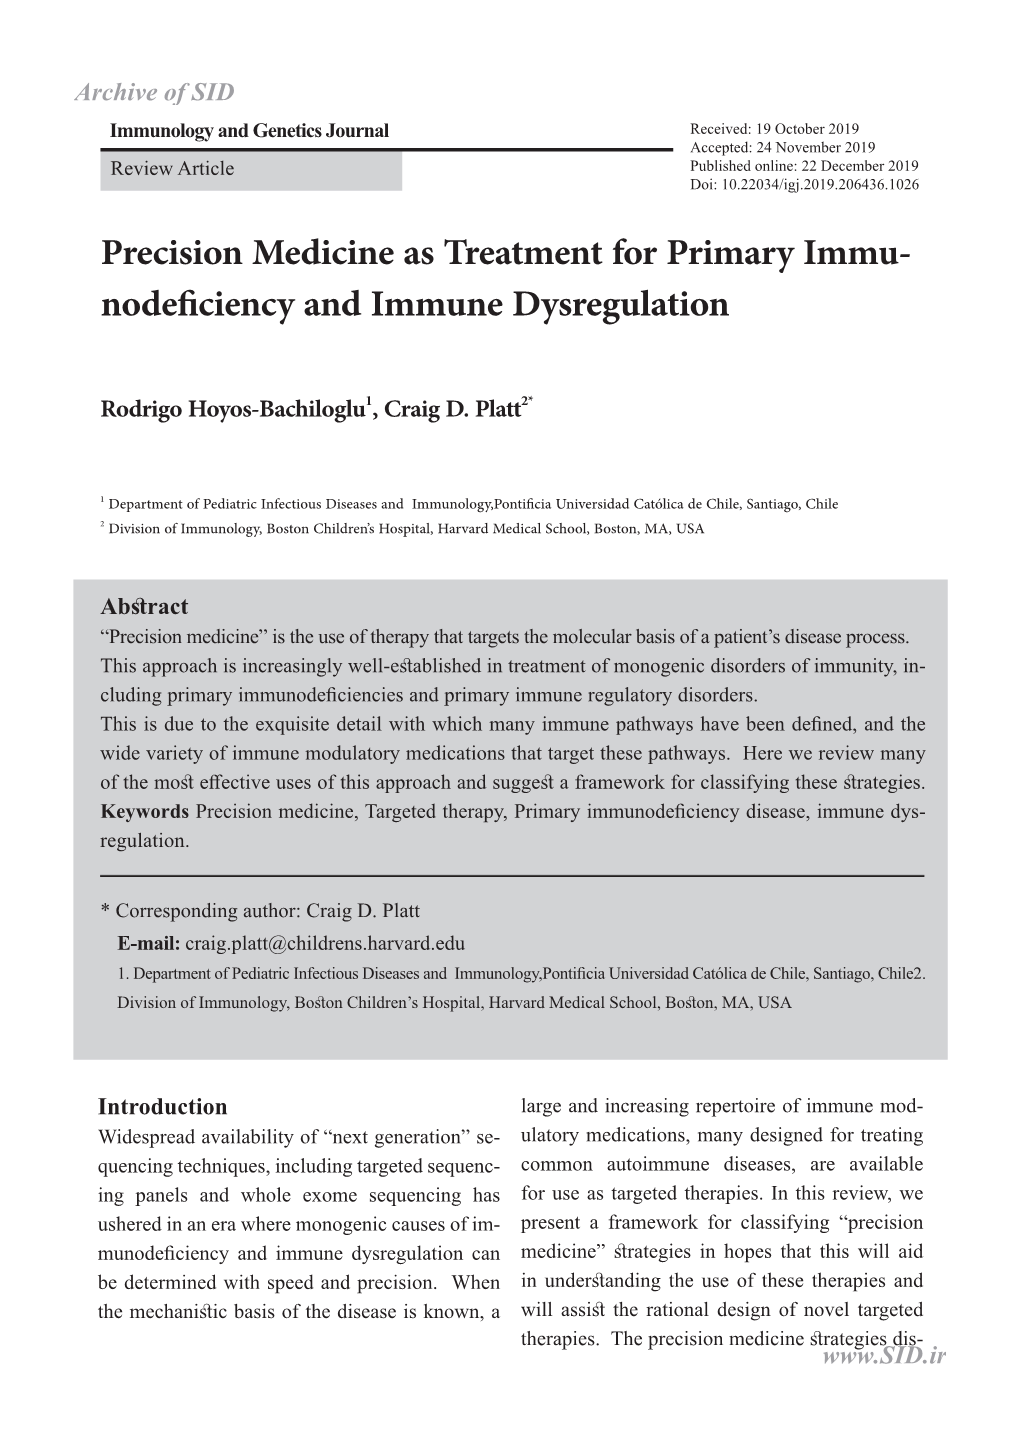 Precision Medicine As Treatment for Primary Immu- Nodeficiency and Immune Dysregulation